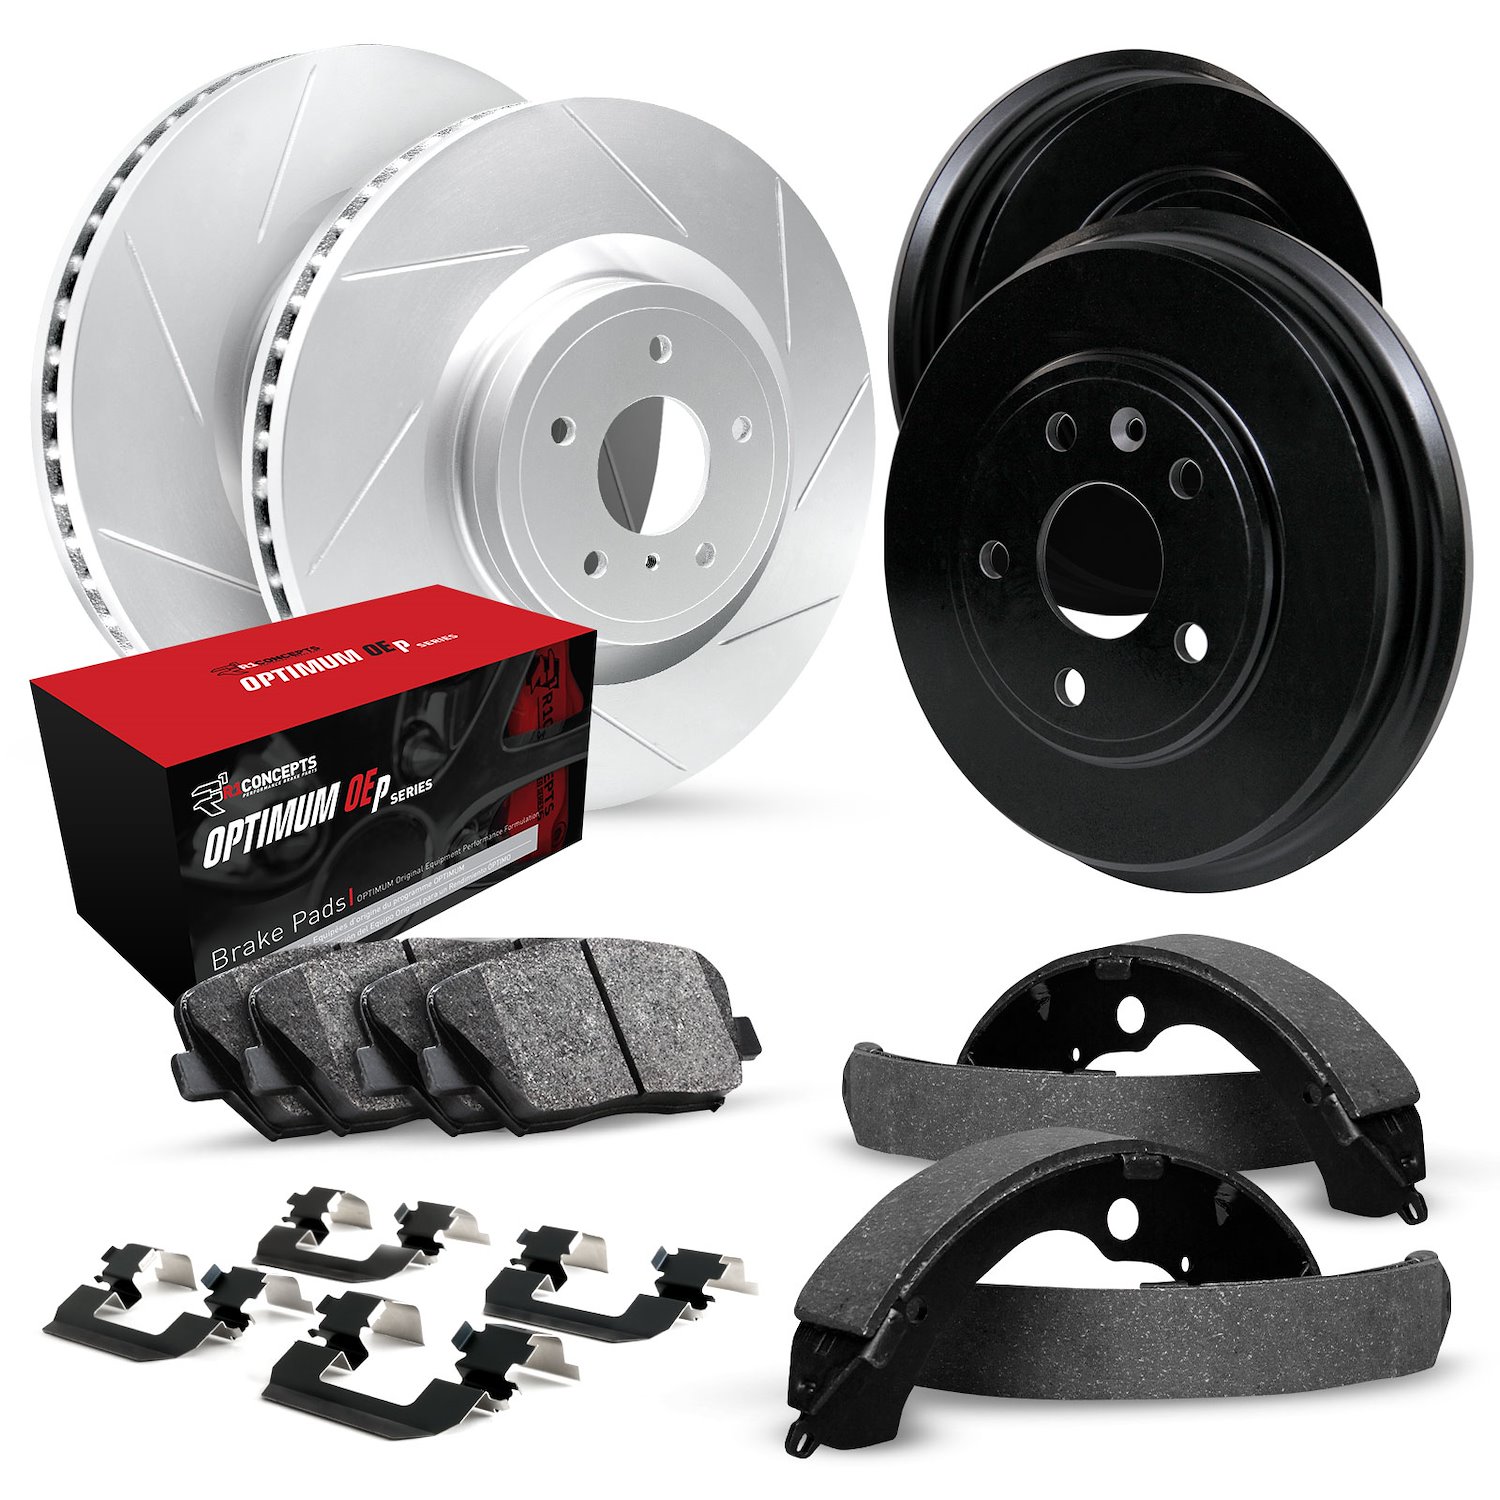 GEO-Carbon Slotted Brake Rotor & Drum Set w/Optimum OE Pads, Shoes, & Hardware, 1992-2002 GM, Position: Front & Rear